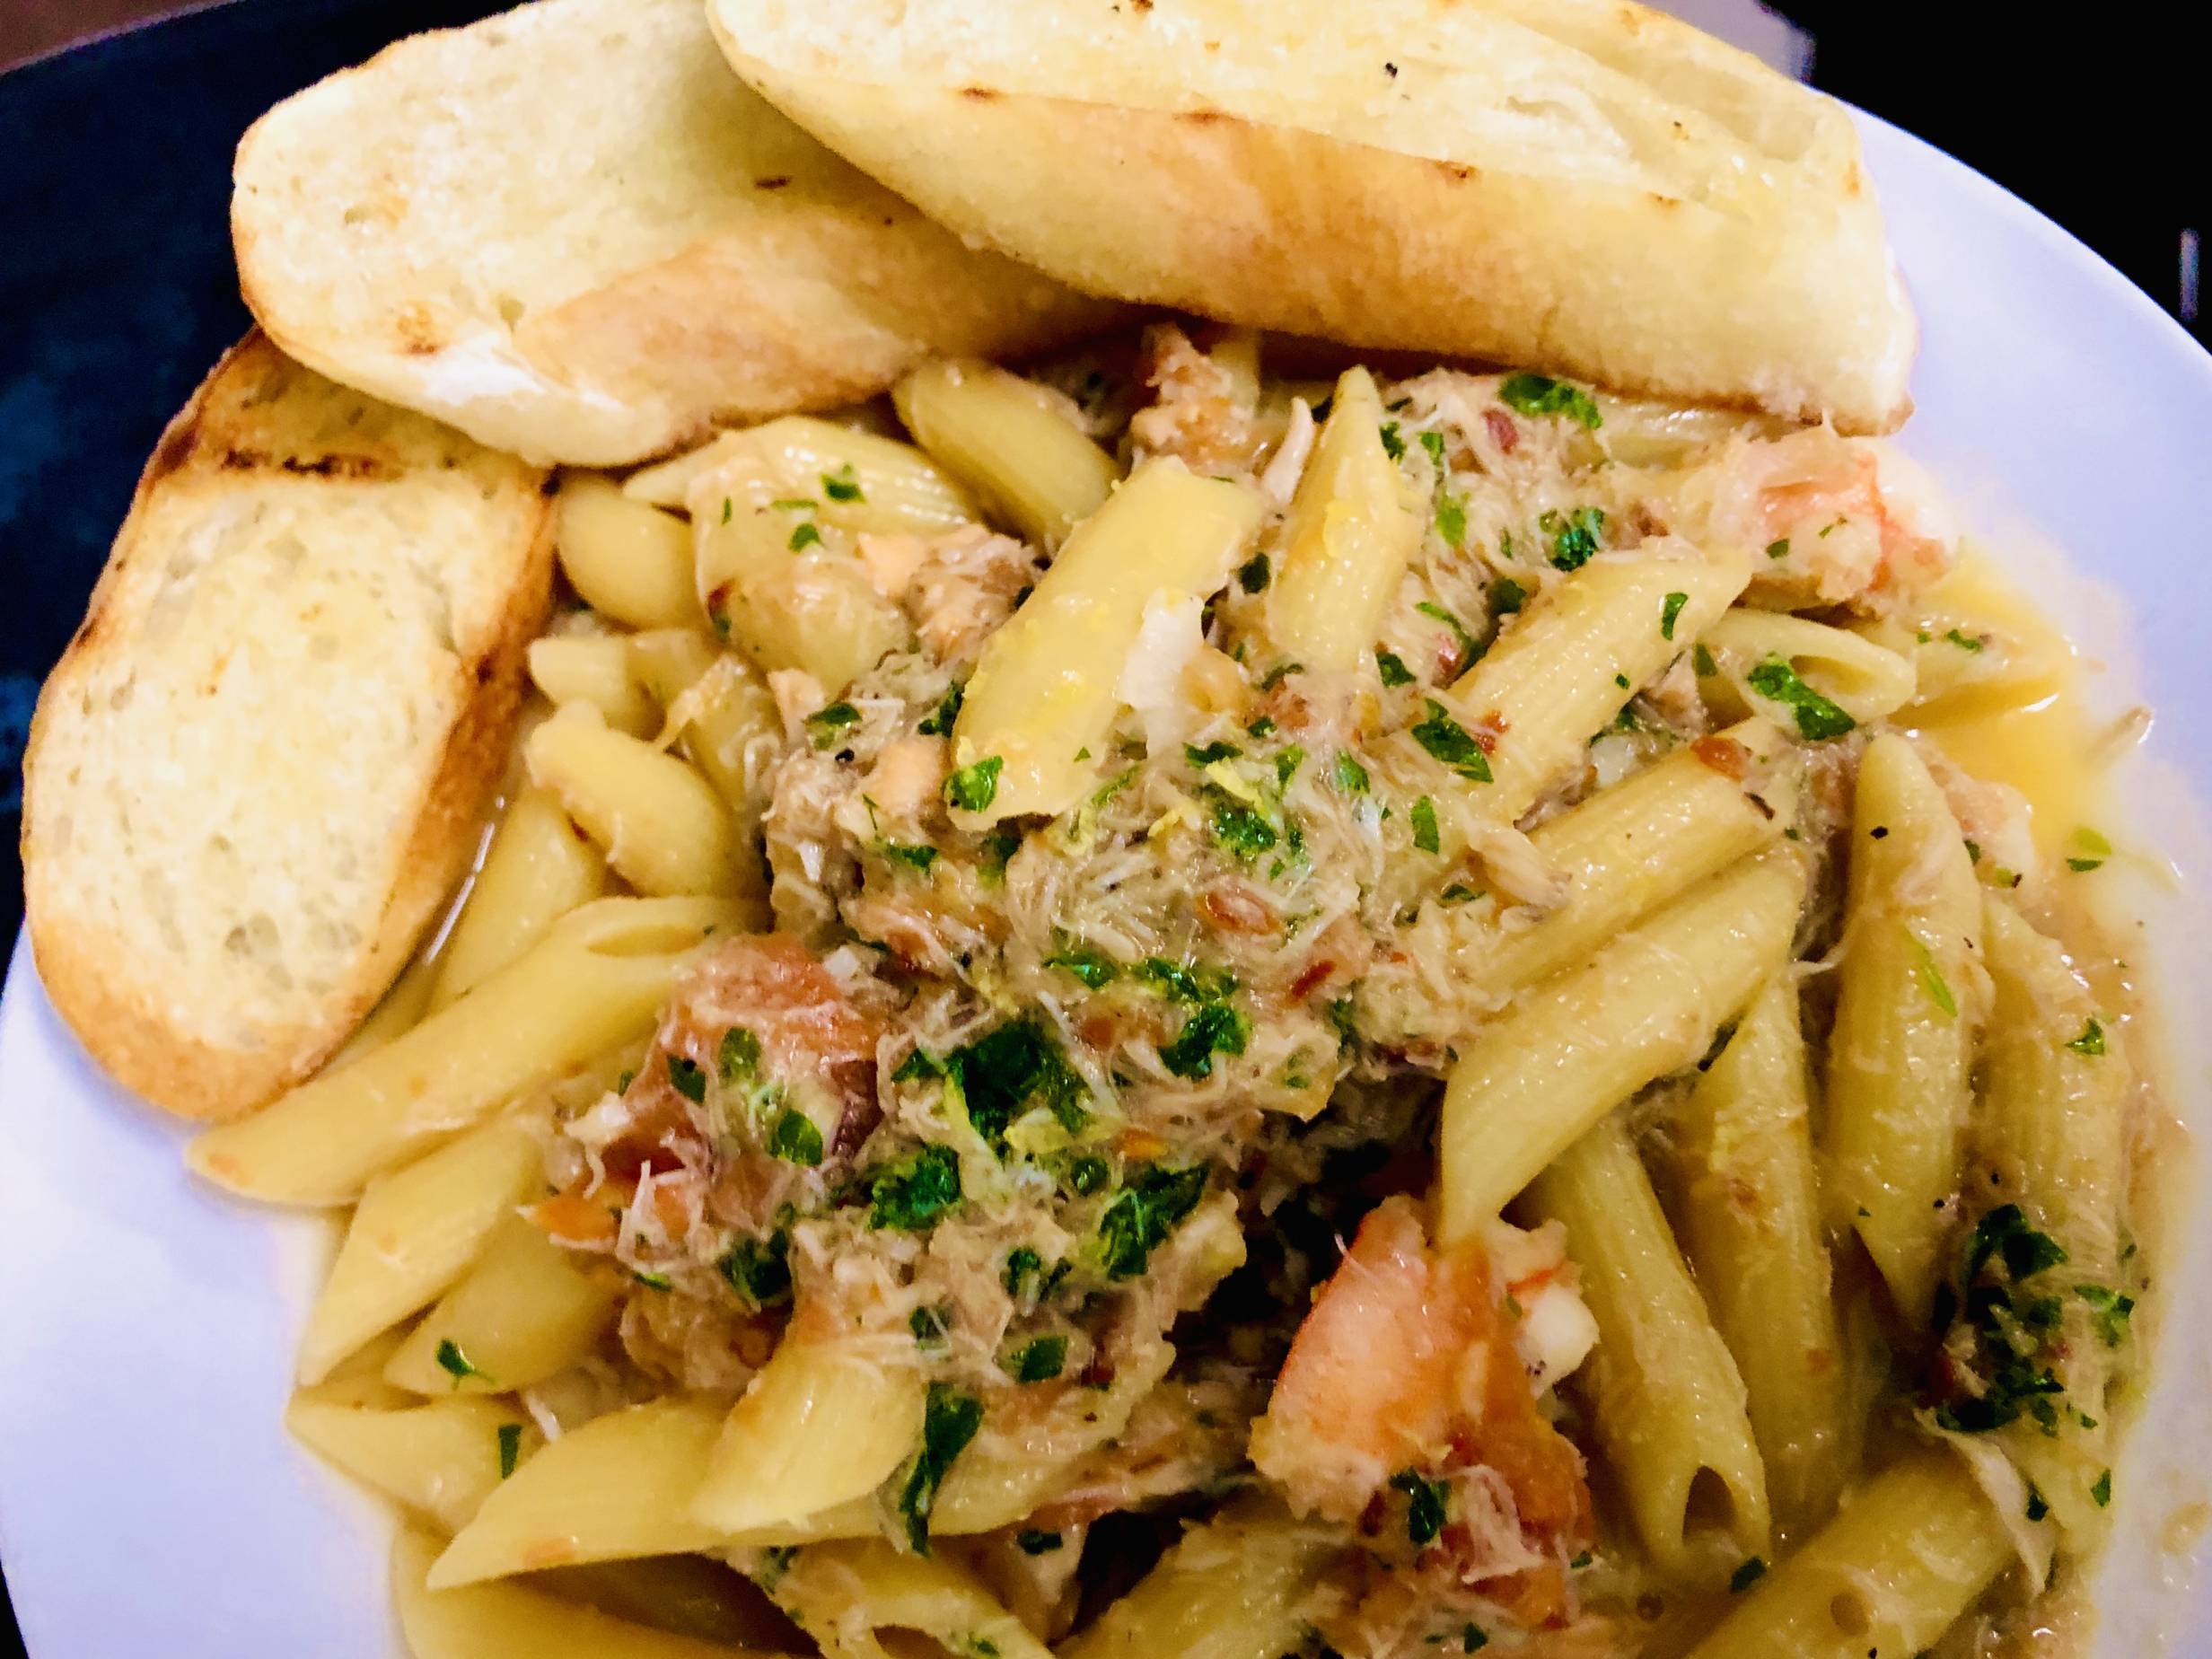 Penne pasta is topped with a slightly golden, glossy spiced tomato butter sauce, which pools at the bottom of the dish white pasta bowl. A combination of flaked crab, salmon, and a few whole shrimp are scattered throughout. It is garnished with parsley flakes. Three thin, bias-cut slices of lightly grilled baguette are laid, overlapping, across the top of the dish. Photo by Hamilton Walkerâ€™s.